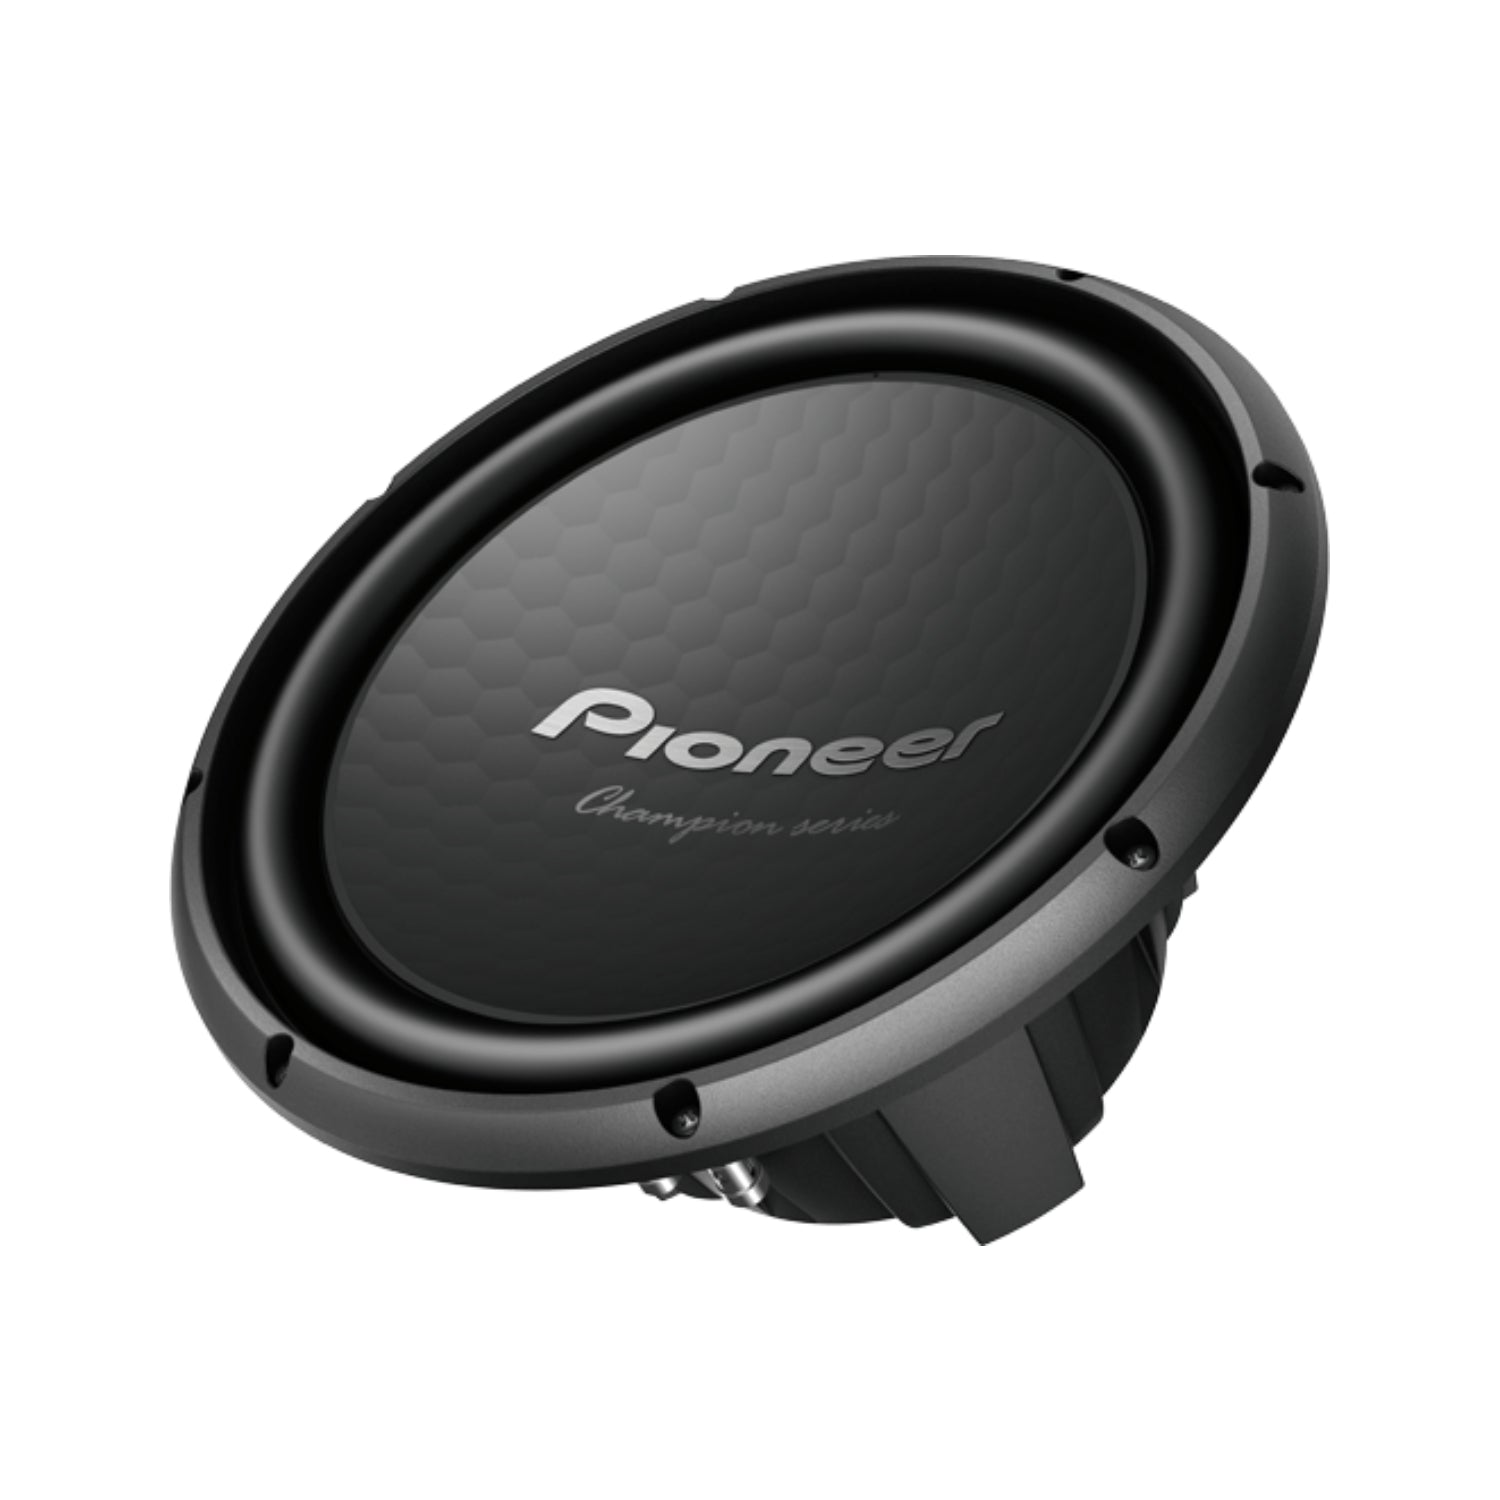 Pioneer TS-W1202D4 New Champion Series Powerful Subwoofer Champion Series Loud Experience at 1500W Maximum Power